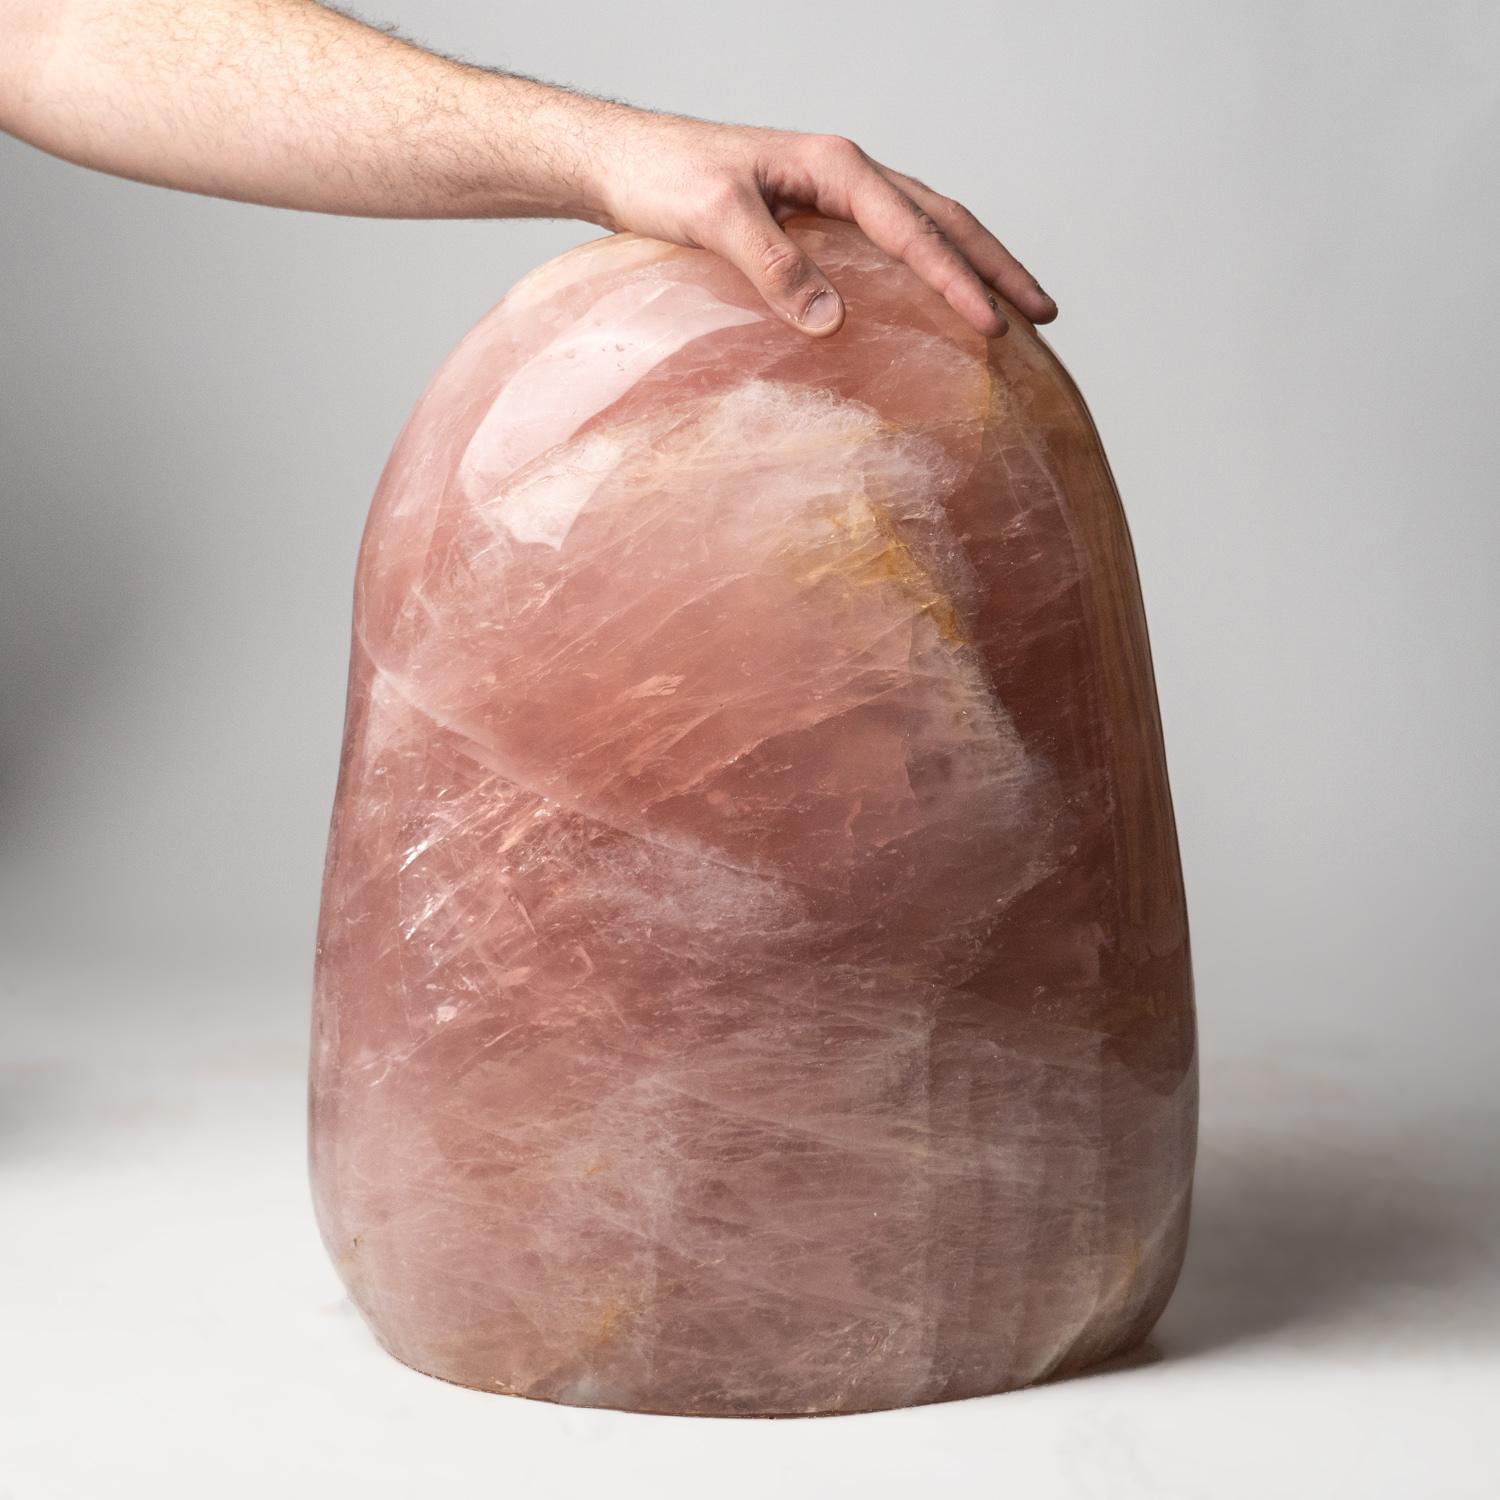 This massive, 133 pound, hand-polished, AAA-quality Rose Quartz freeform from Madagascar is incredibly crafted from one solid piece of Rose Quartz. This beautiful freeform is the focal point in any room. Rose Quartz is the stone of unconditional